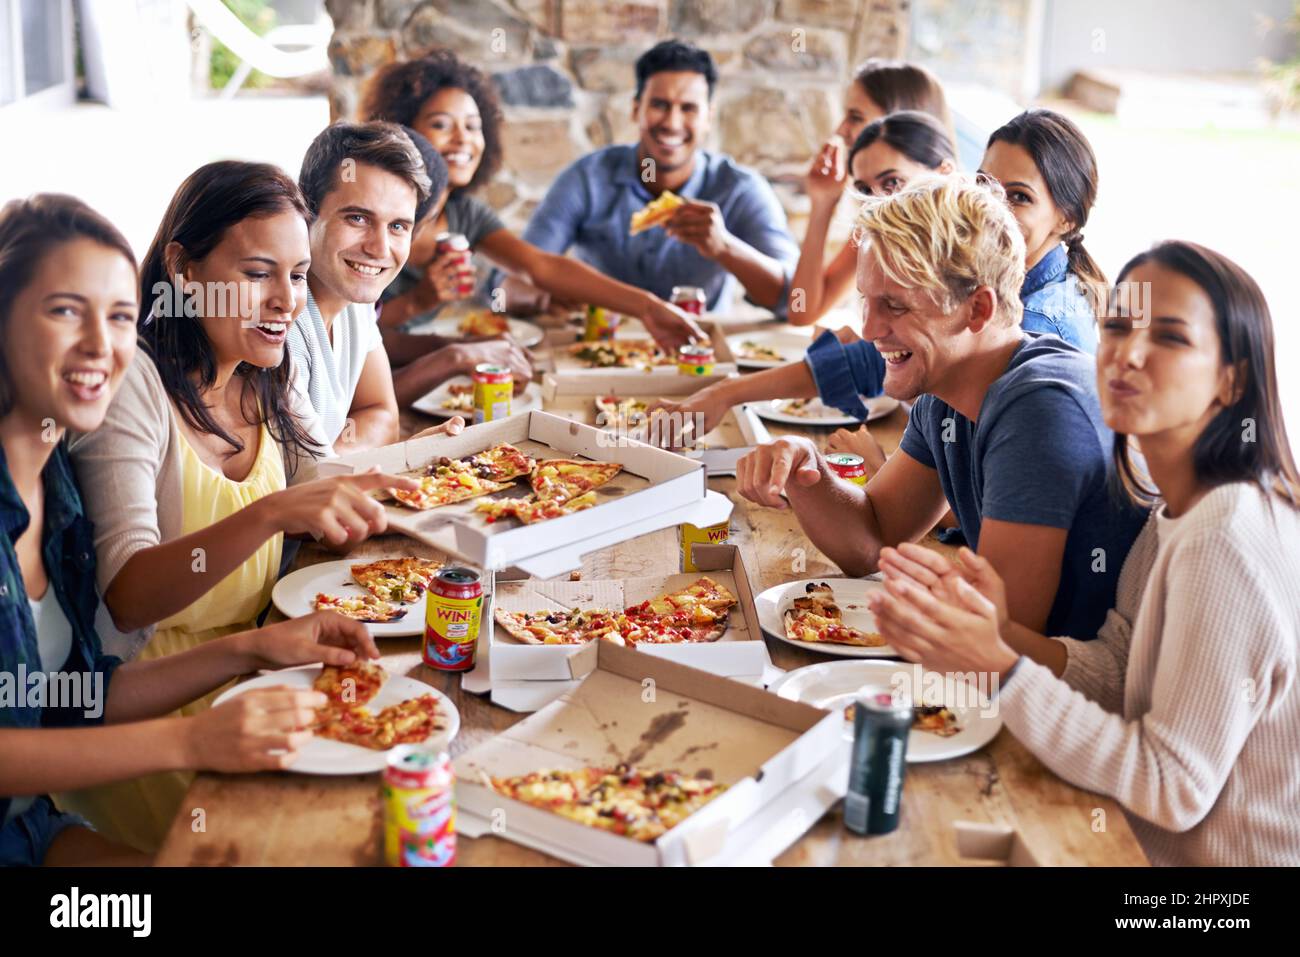 Its time for a pizza party. Cropped shot of a group of friends enjoying pizza together. Stock Photo